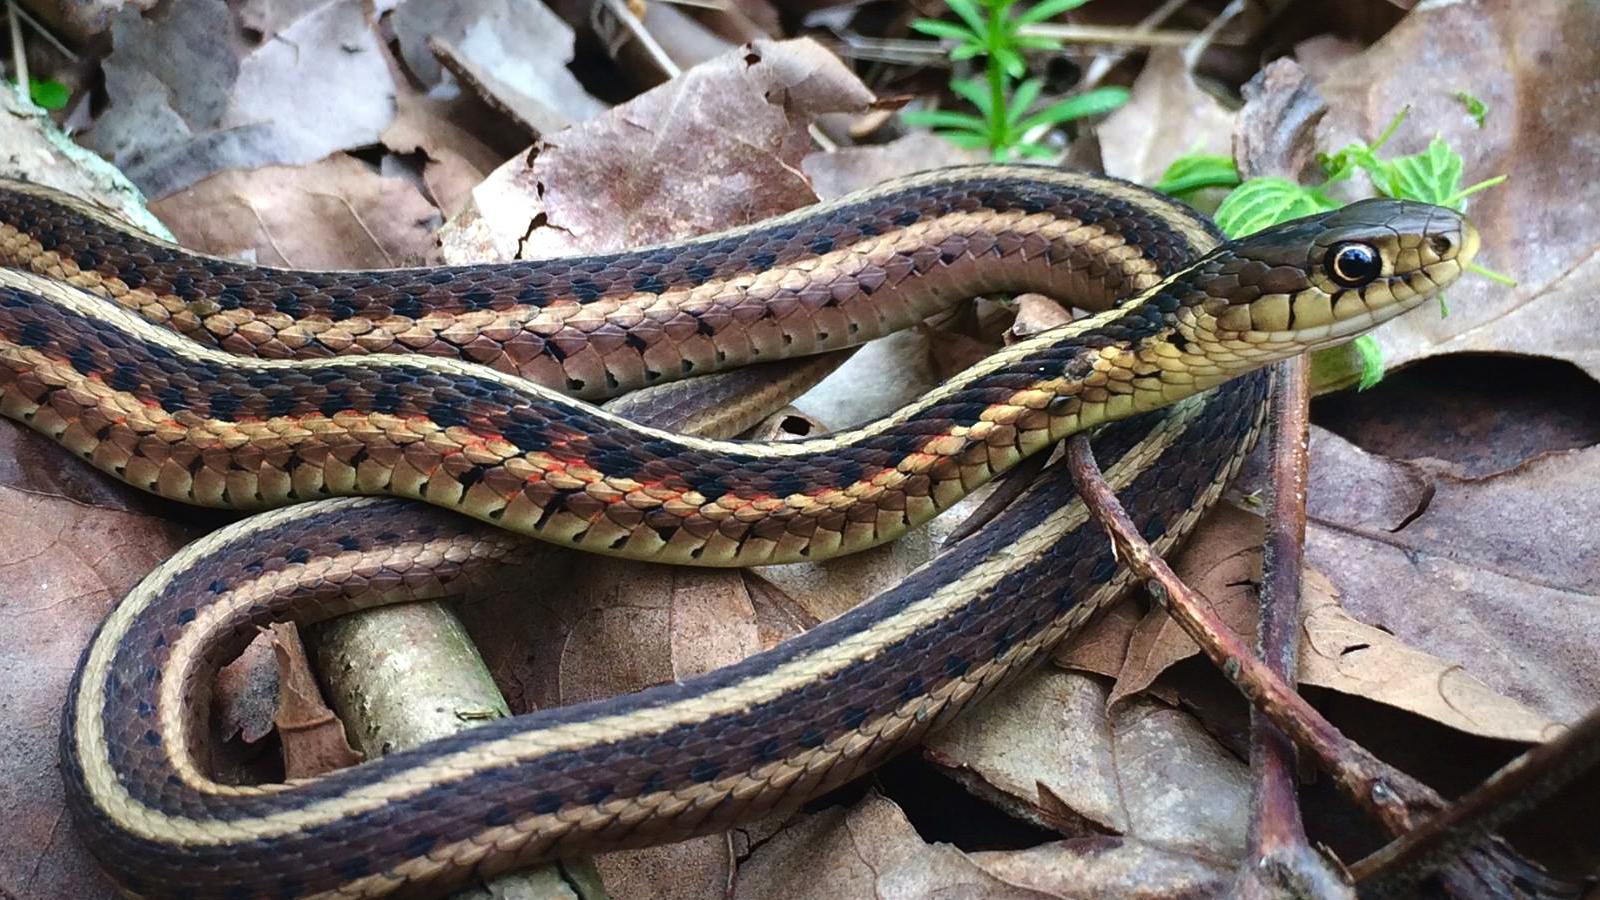 Garter Snakes Can Be Surprise Guests